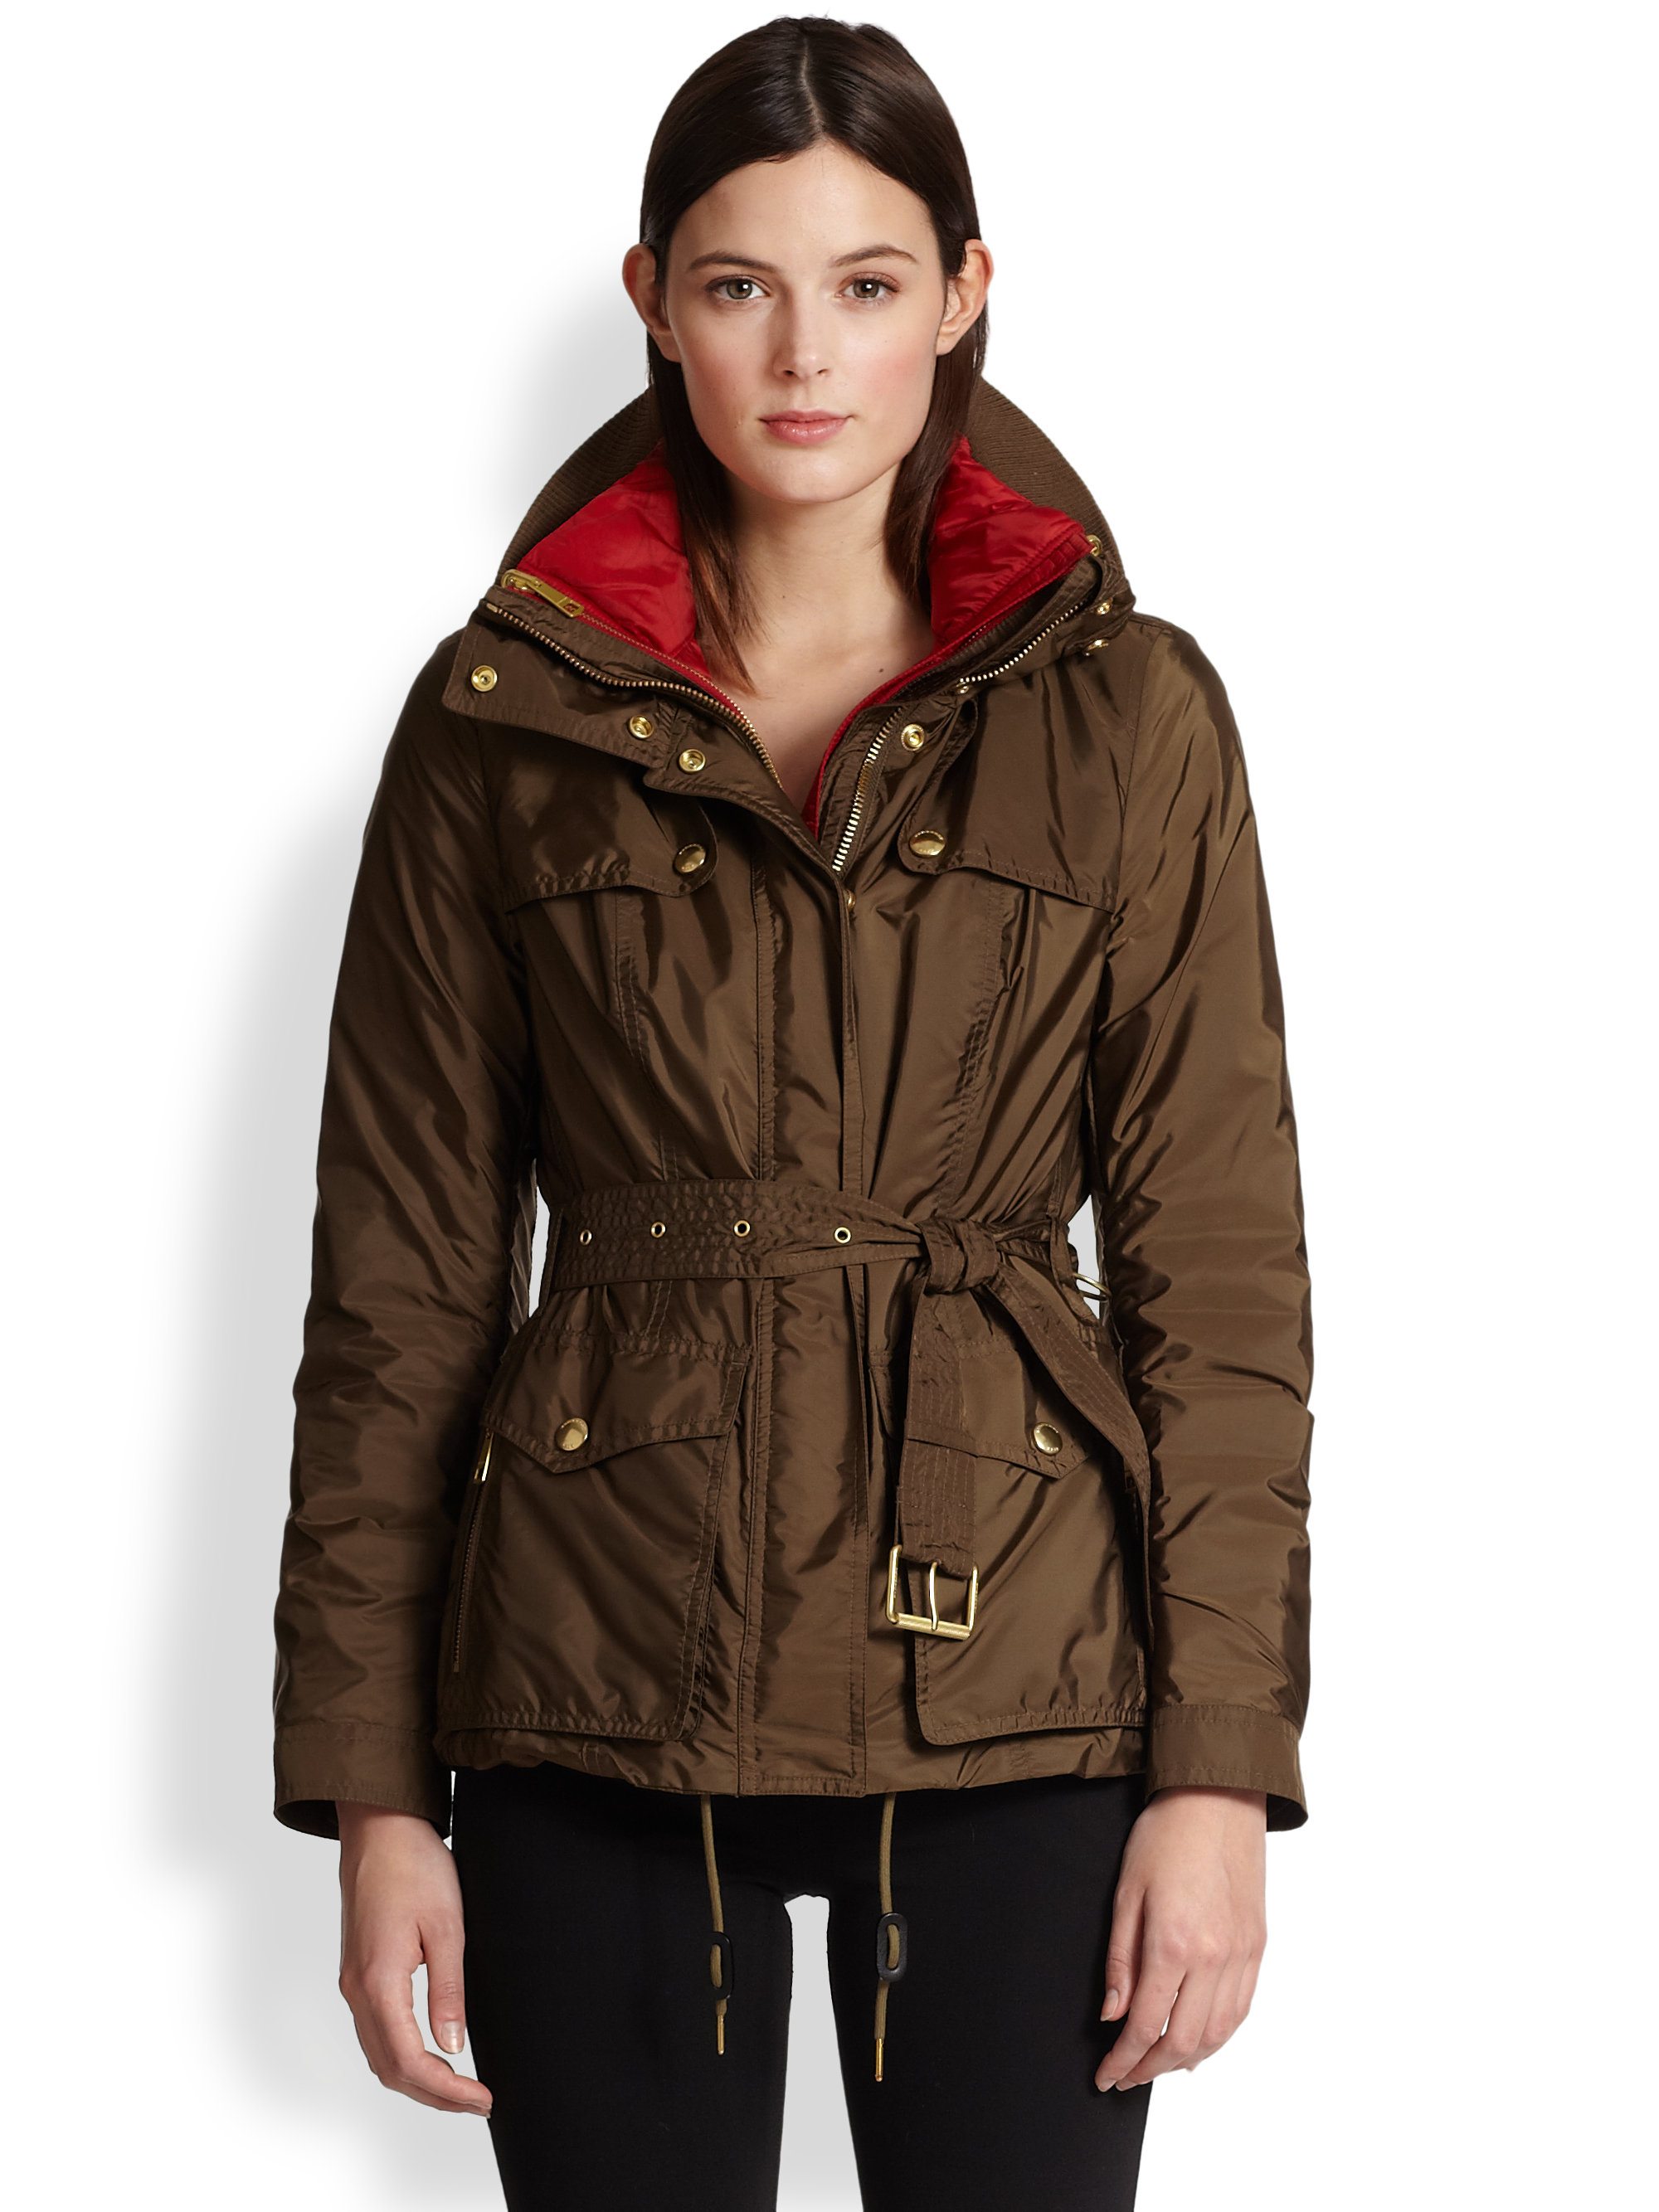 Lyst - Burberry Brit Baledean Convertible Jacket in Natural